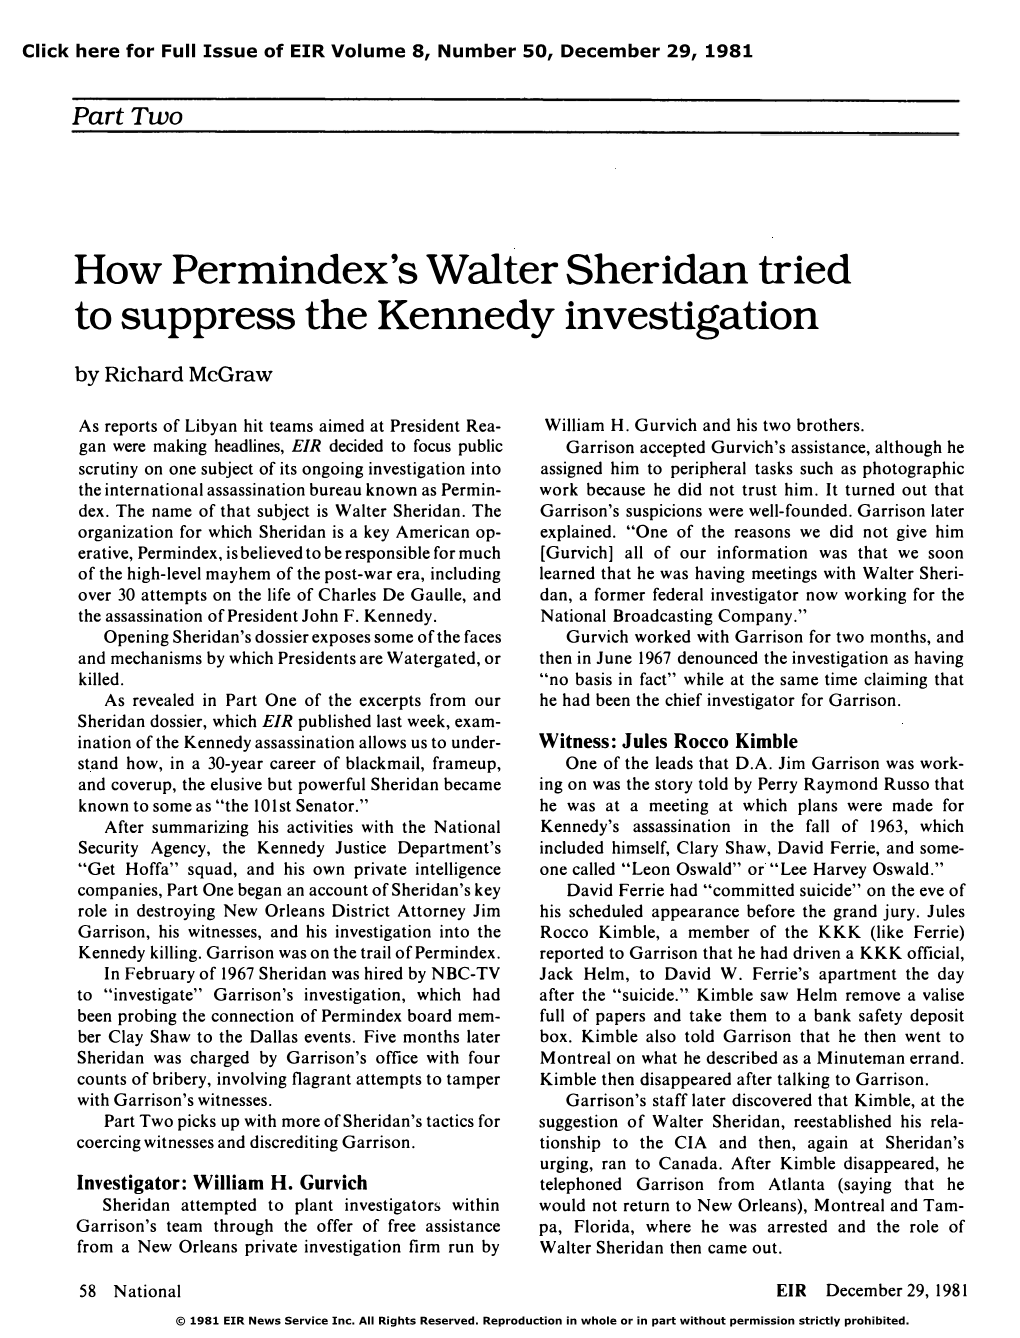 How Permindex's Walter Sheridan Tried to Suppress the Kennedy Investigation